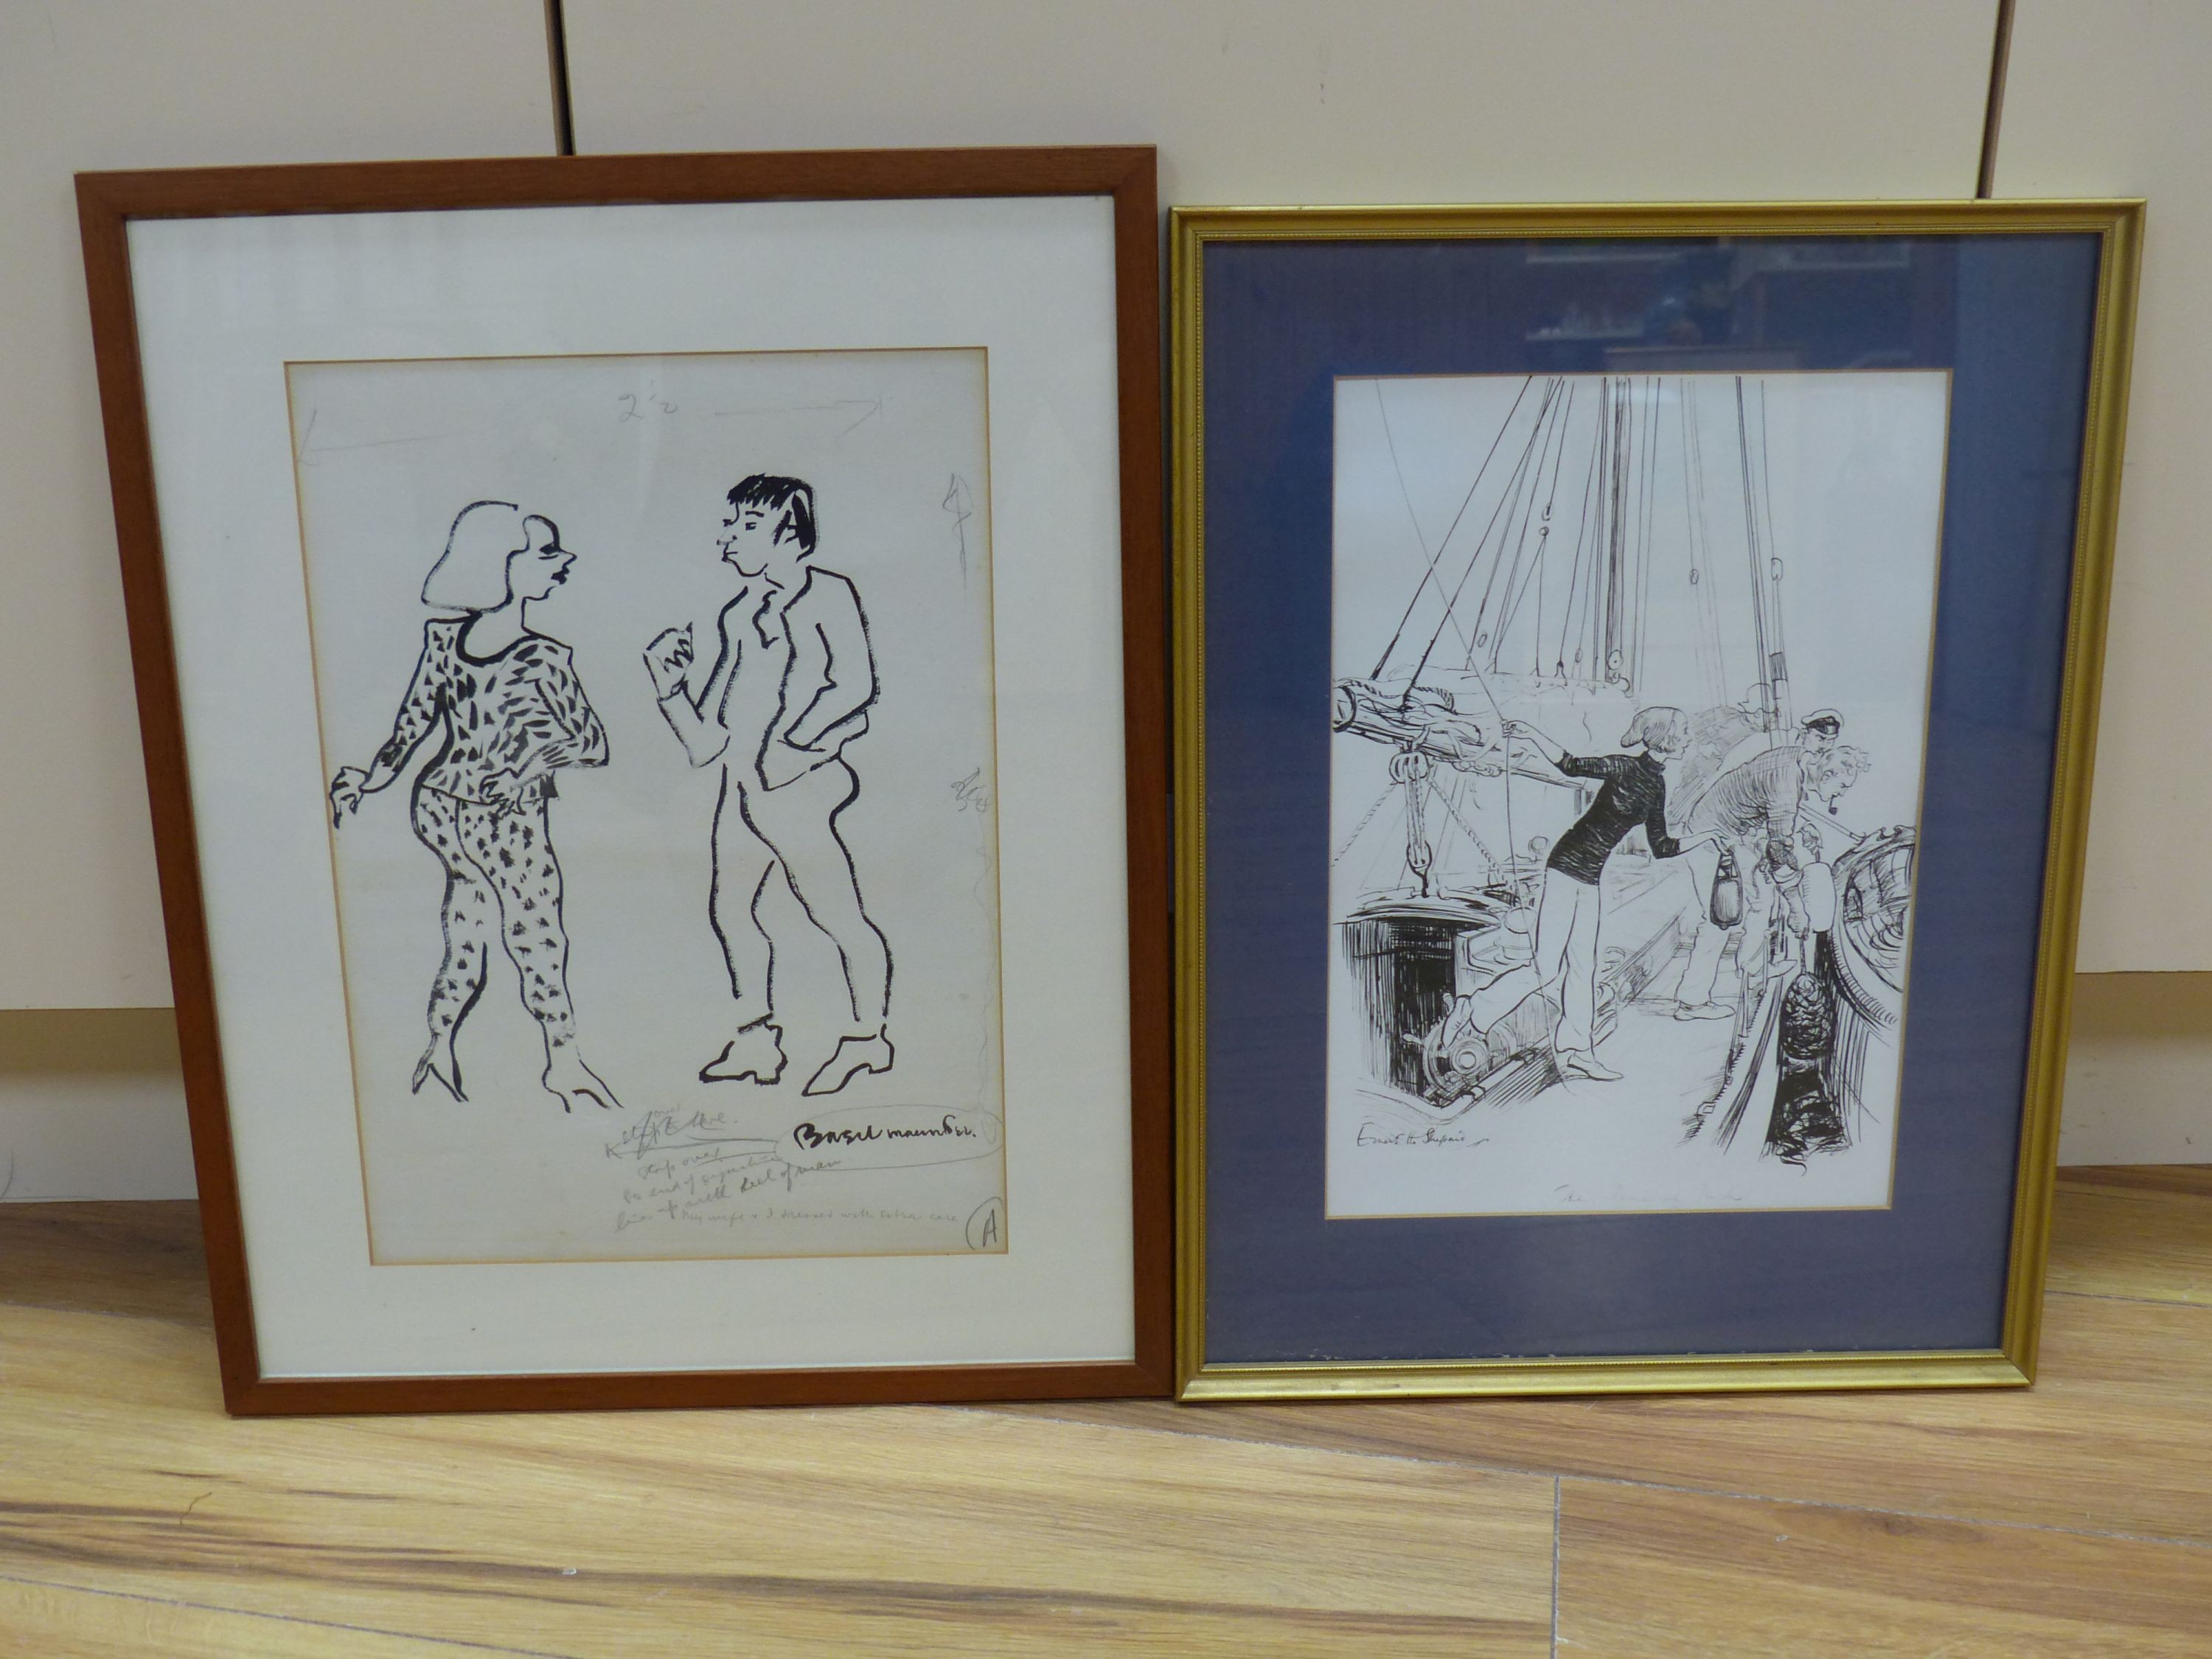 Basil Maunder, watercolour cartoon 'My Wife and I dressed with extra care', signed, 34 x 25cm and a reprint of an Ernest Shepherd drawing